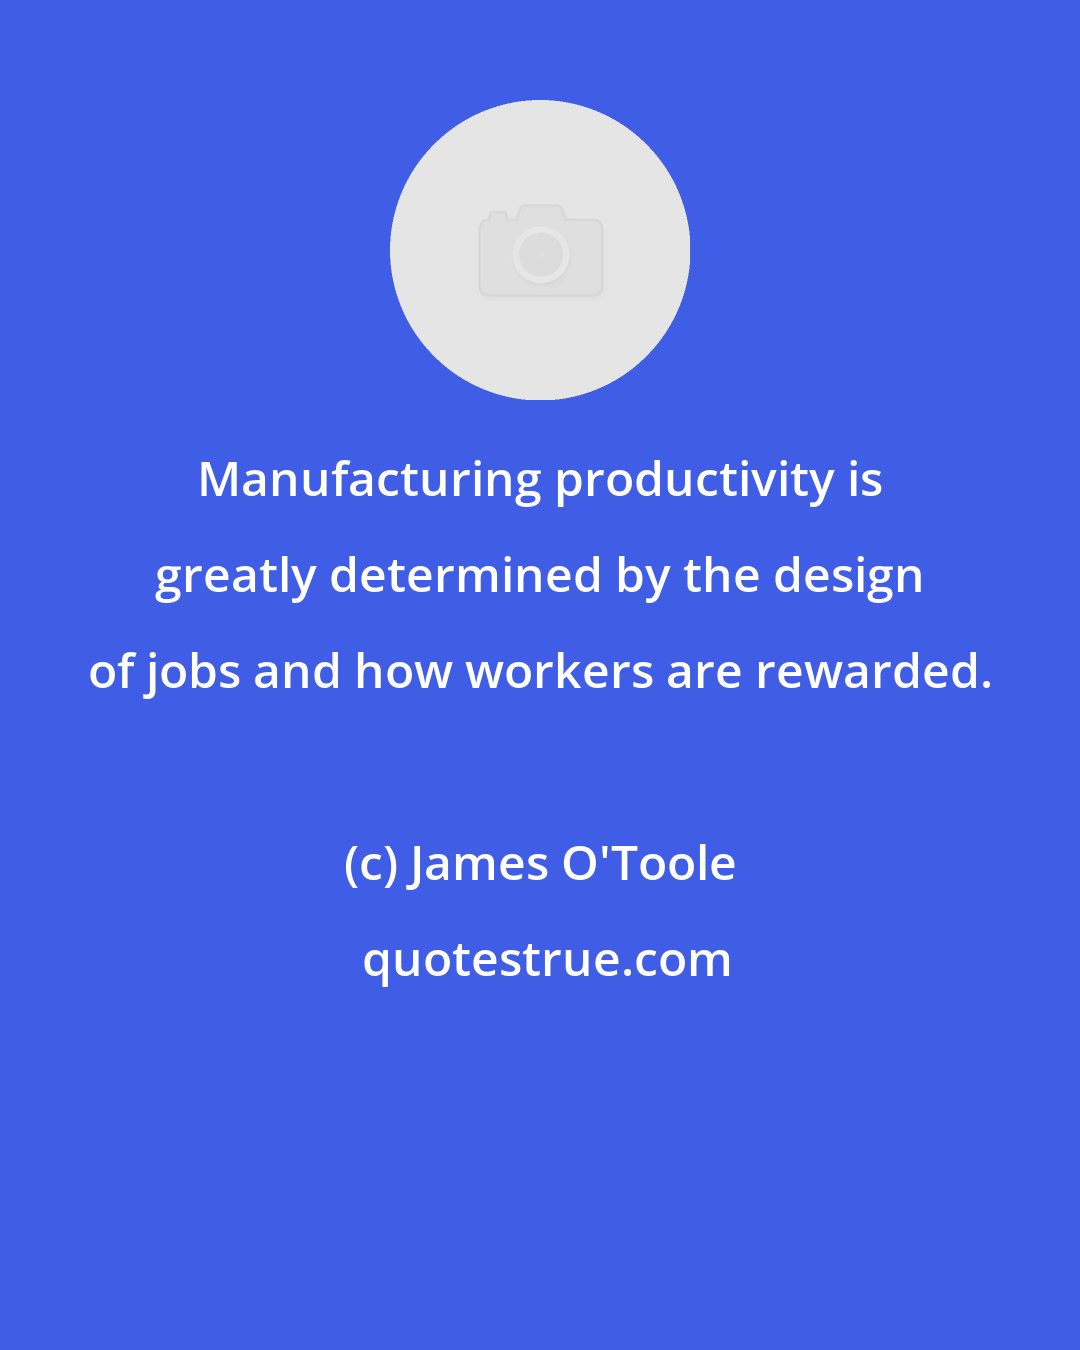 James O'Toole: Manufacturing productivity is greatly determined by the design of jobs and how workers are rewarded.